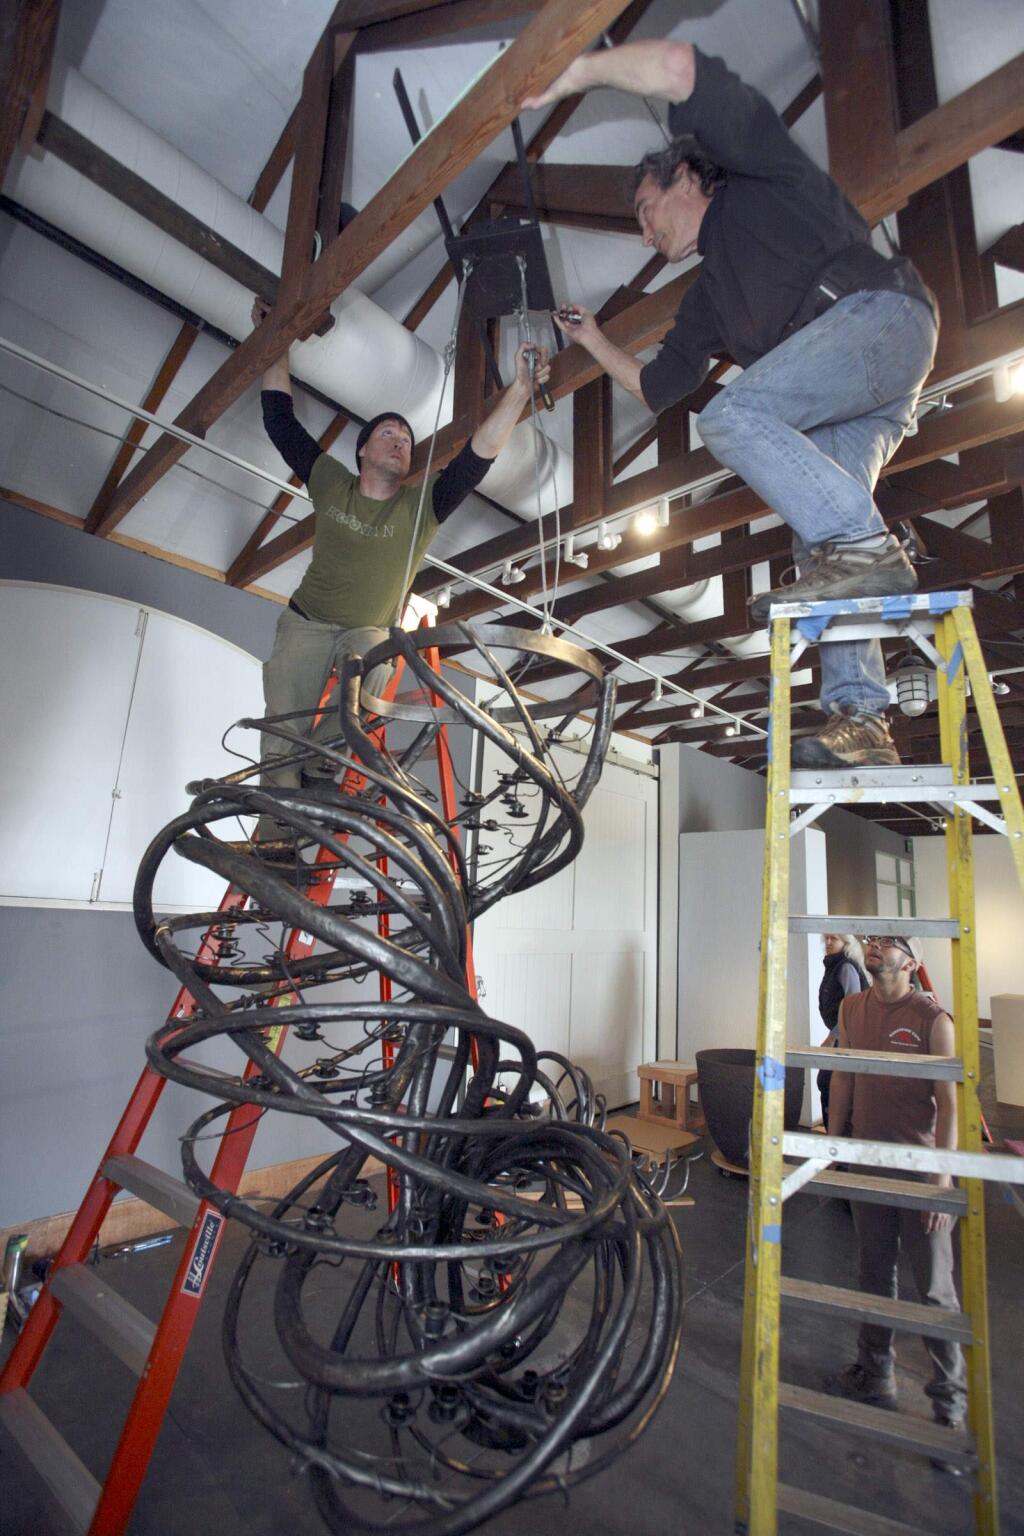 Blacksmith/Artist Daniel Hopper, left, and Museum Installer Nick Krijdt work at hanging Hopper's sculpture The Tornado at the Petaluma Art Center as part of an exhibit that is opening March 19th featuring metal works on Monday, March 14, 2016. (SCOTT MANCHESTER/ARGUS-COURIER STAFF)